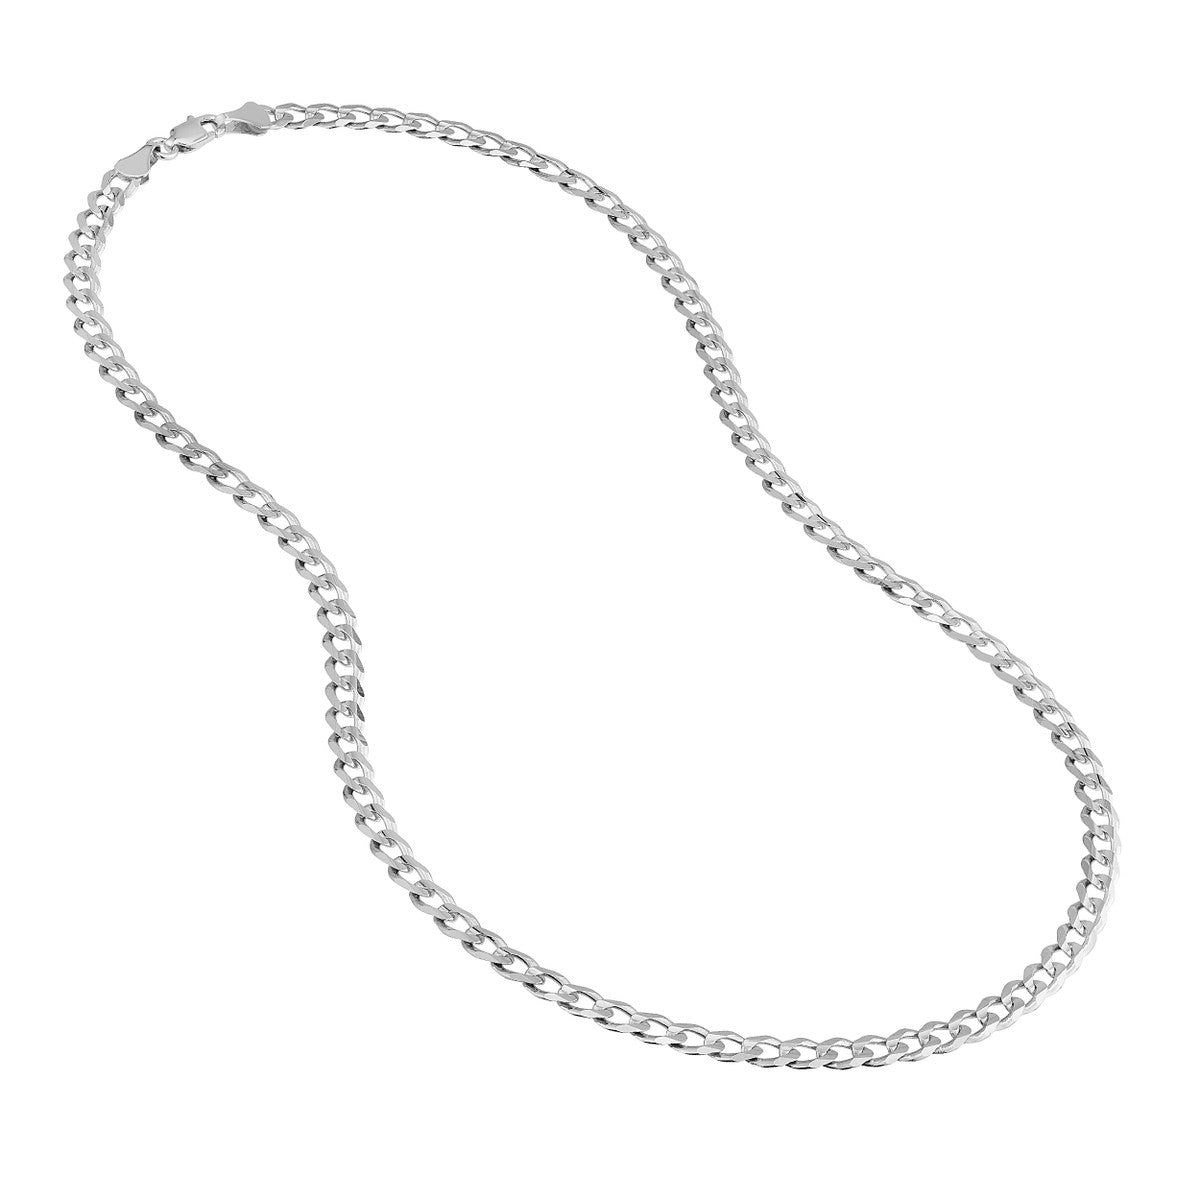 Sterling Silver 5mm Curb Link Chain